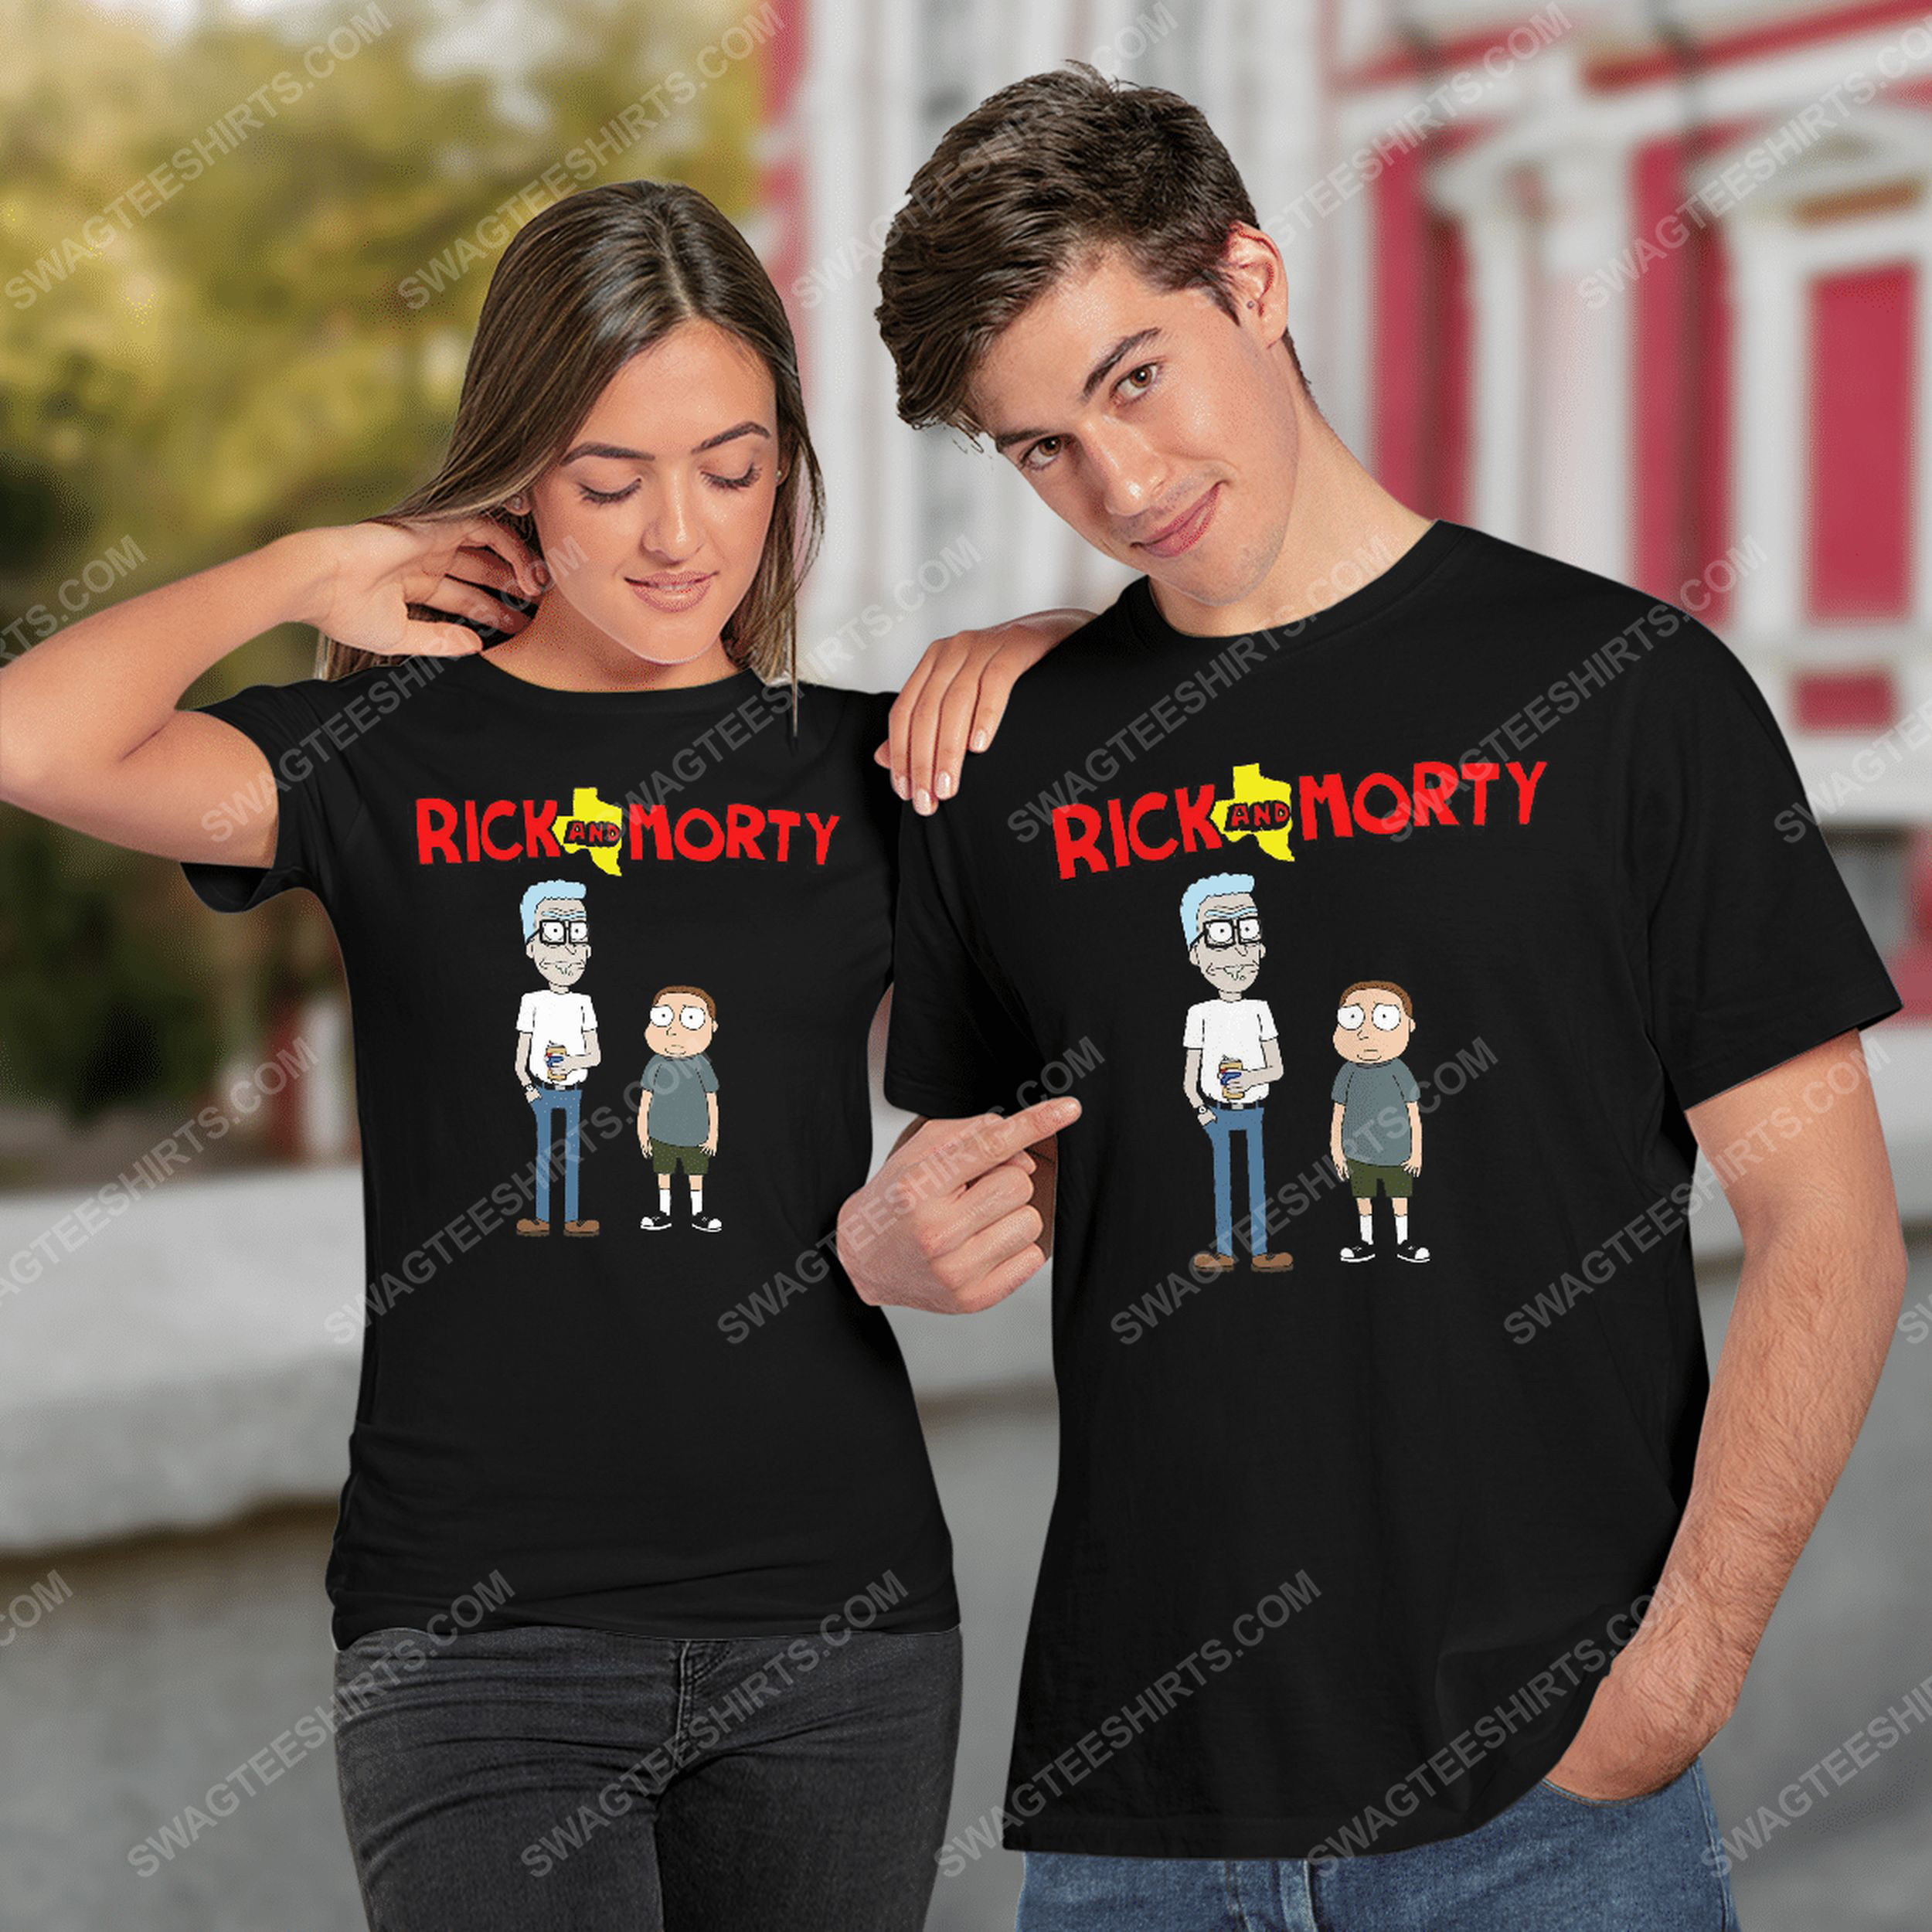 Tv show rick and morty and king of the hill tshirt(1)